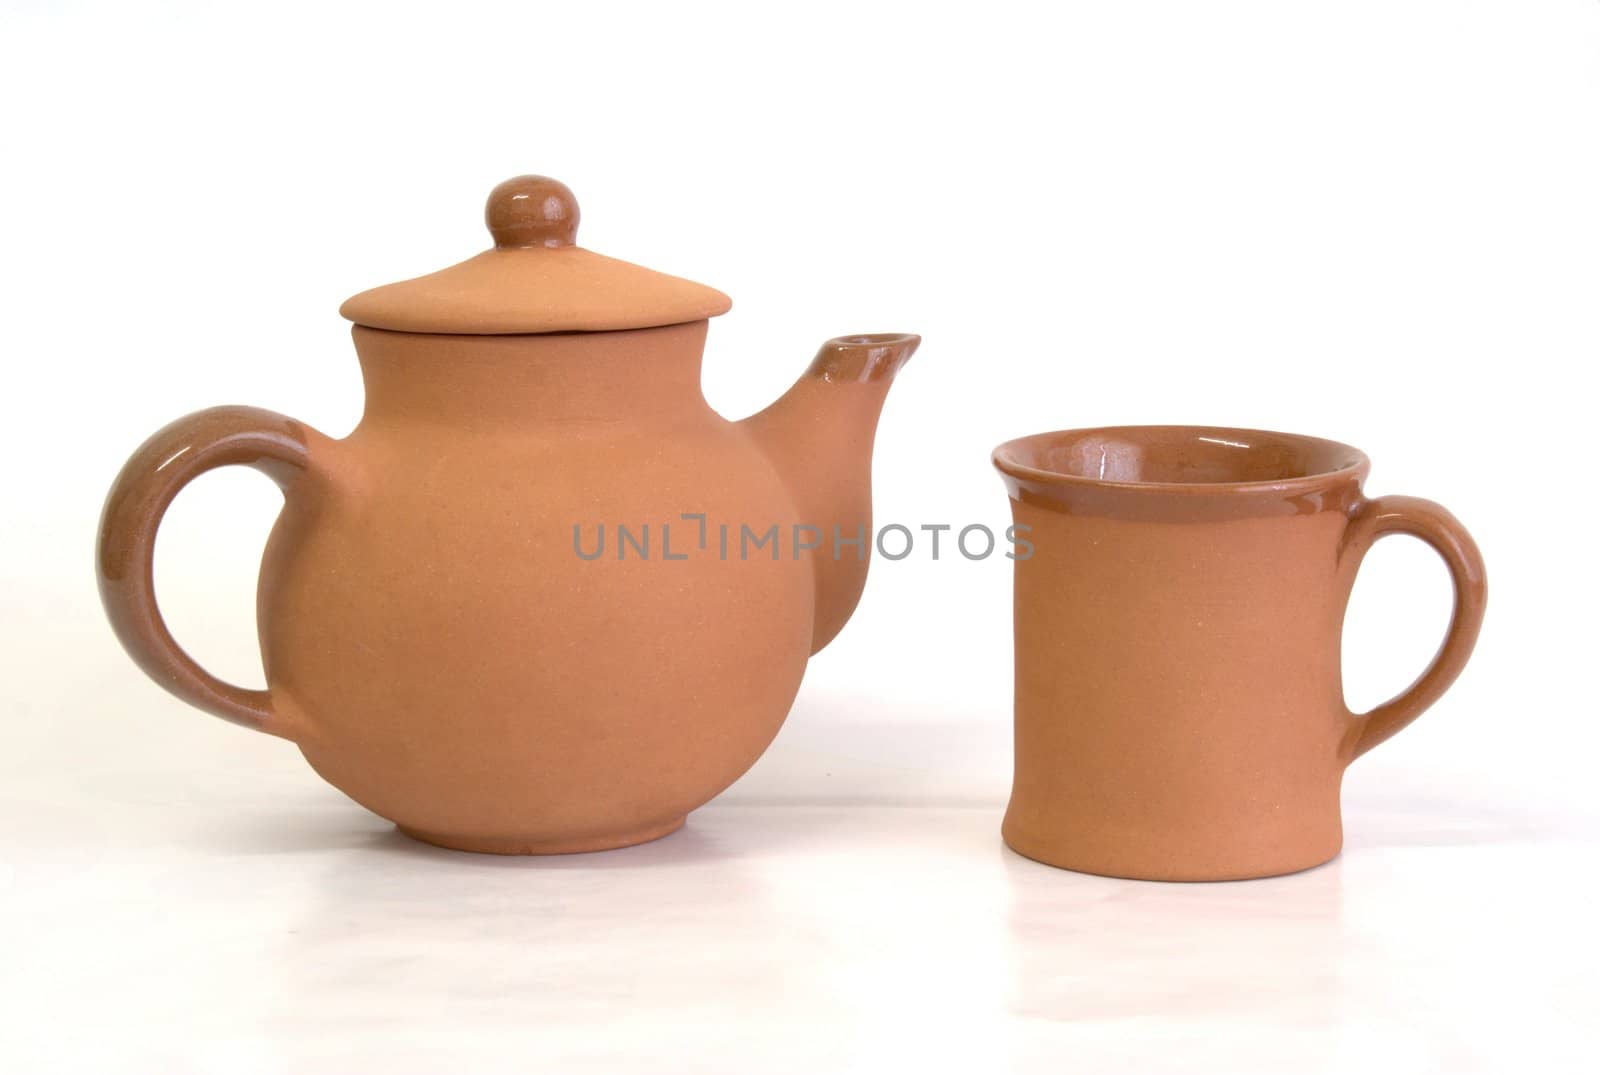 Teapot with cup by pmisak